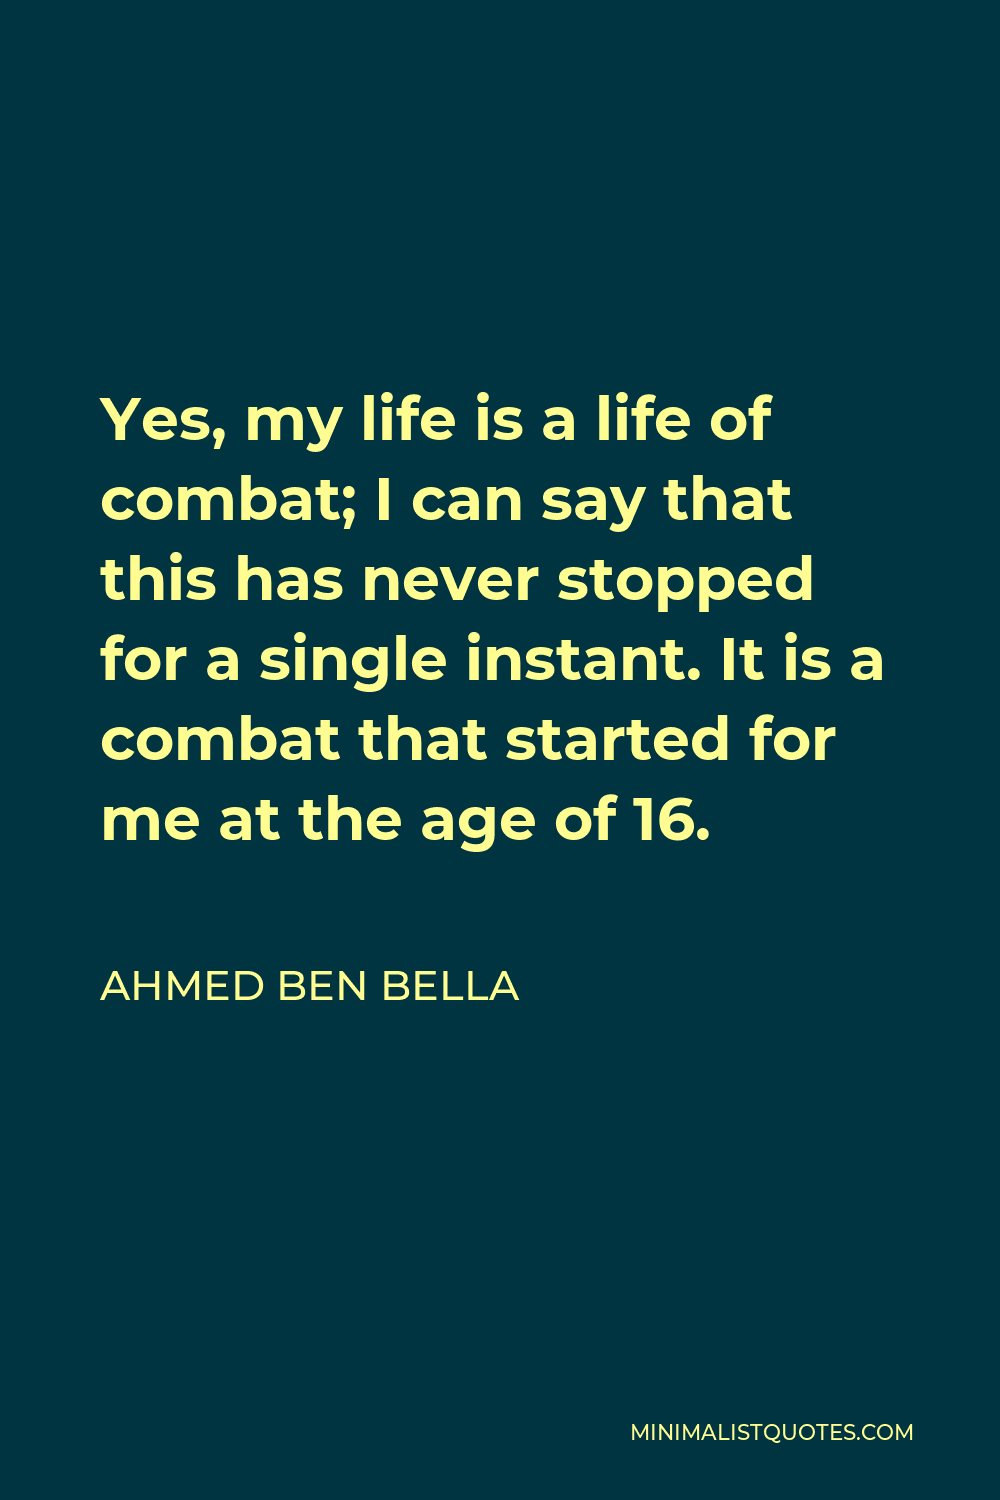 Ahmed Ben Bella Quote - Yes, my life is a life of combat; I can say that this has never stopped for a single instant. It is a combat that started for me at the age of 16.